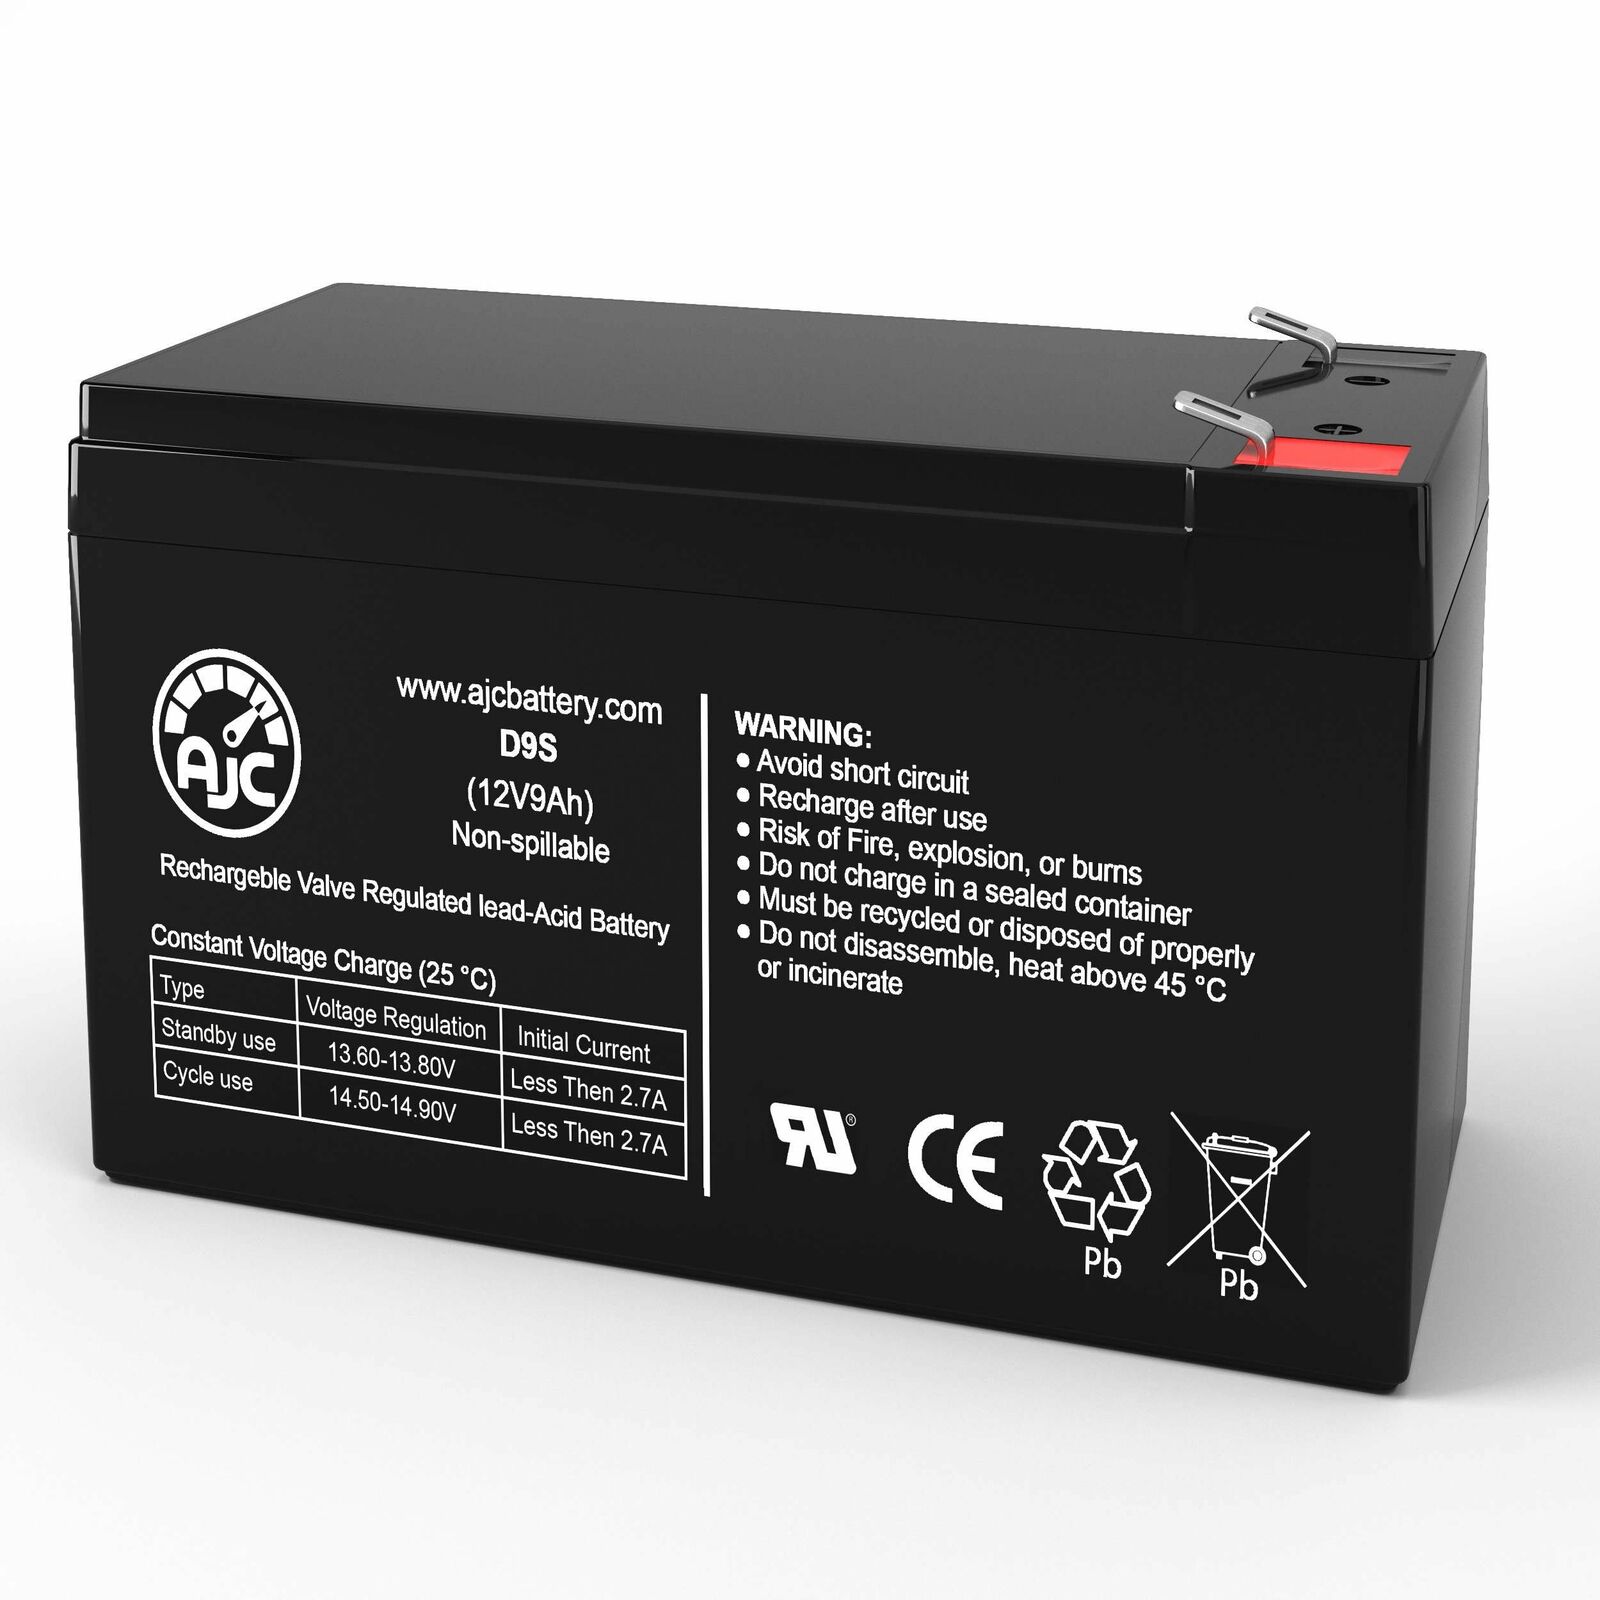 Tripp Lite OmniPlus 1000LCD 12V 9Ah UPS Replacement Battery